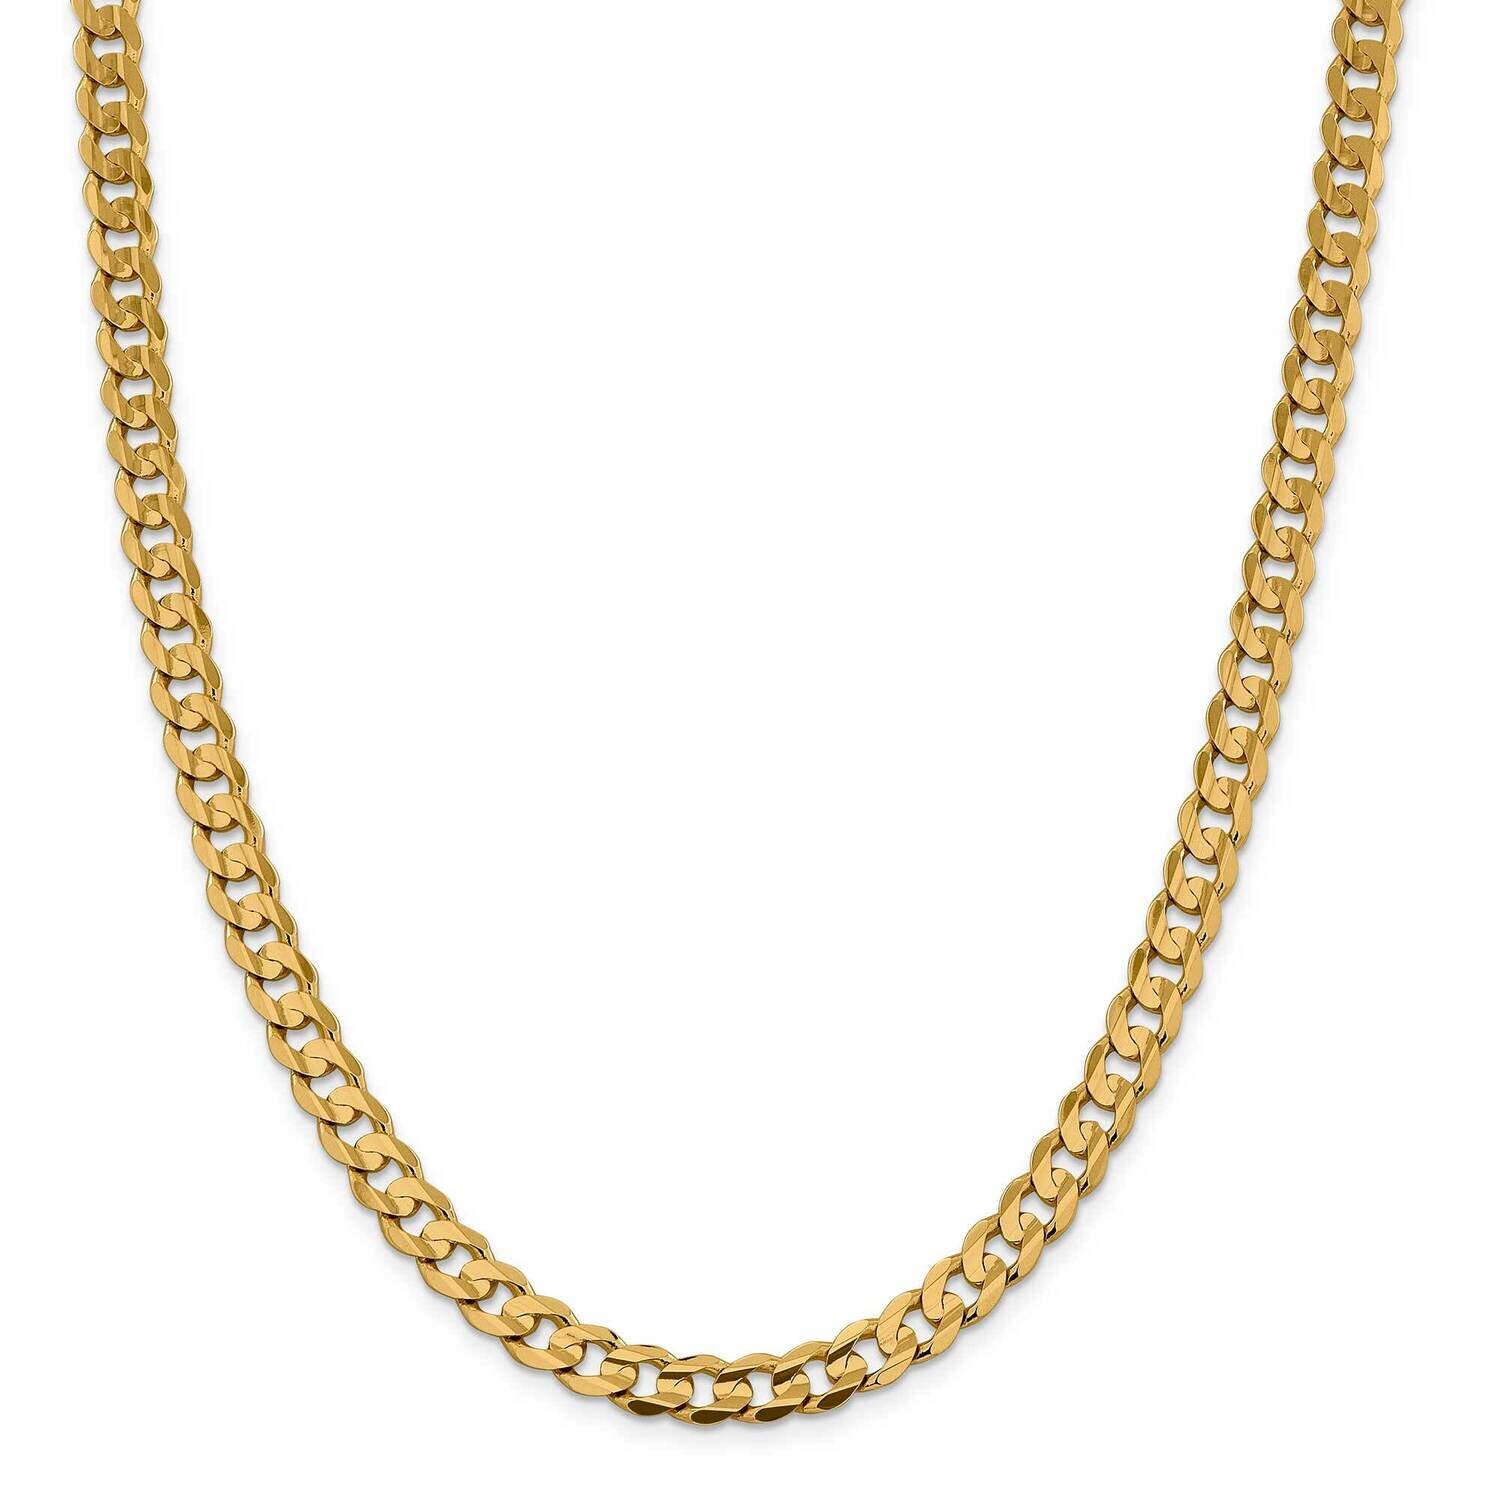 7.5mm Open Concave Curb Chain 26 Inch 14k Gold LCR200-26